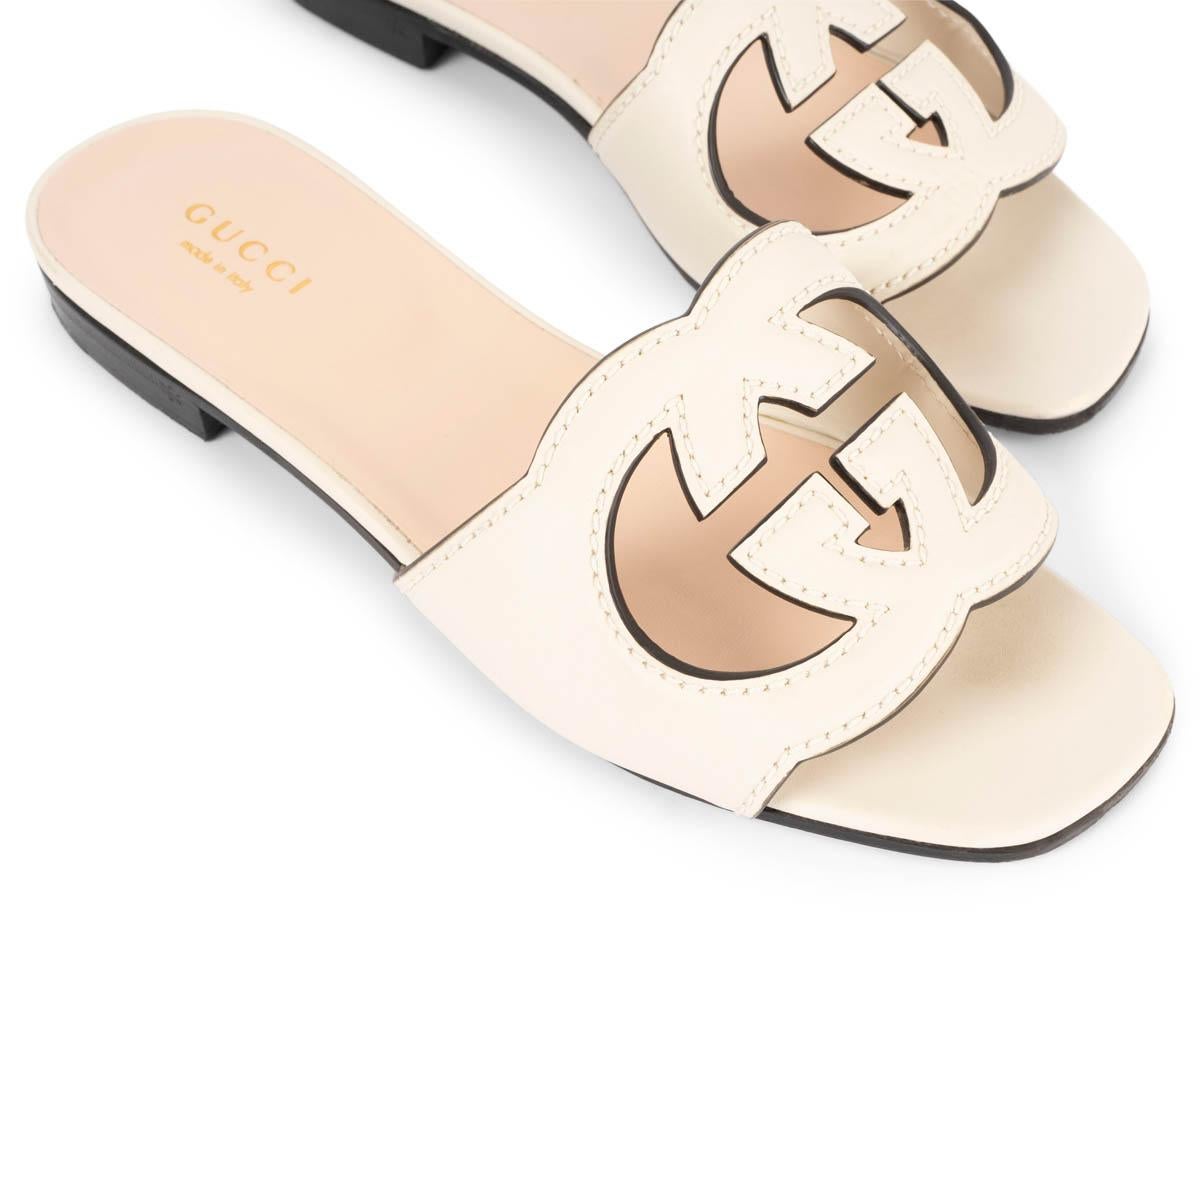 GUCCI cream leather INTERLOCKING G CUT-OUT SLIDE Sandals Shoes 35 For Sale 1